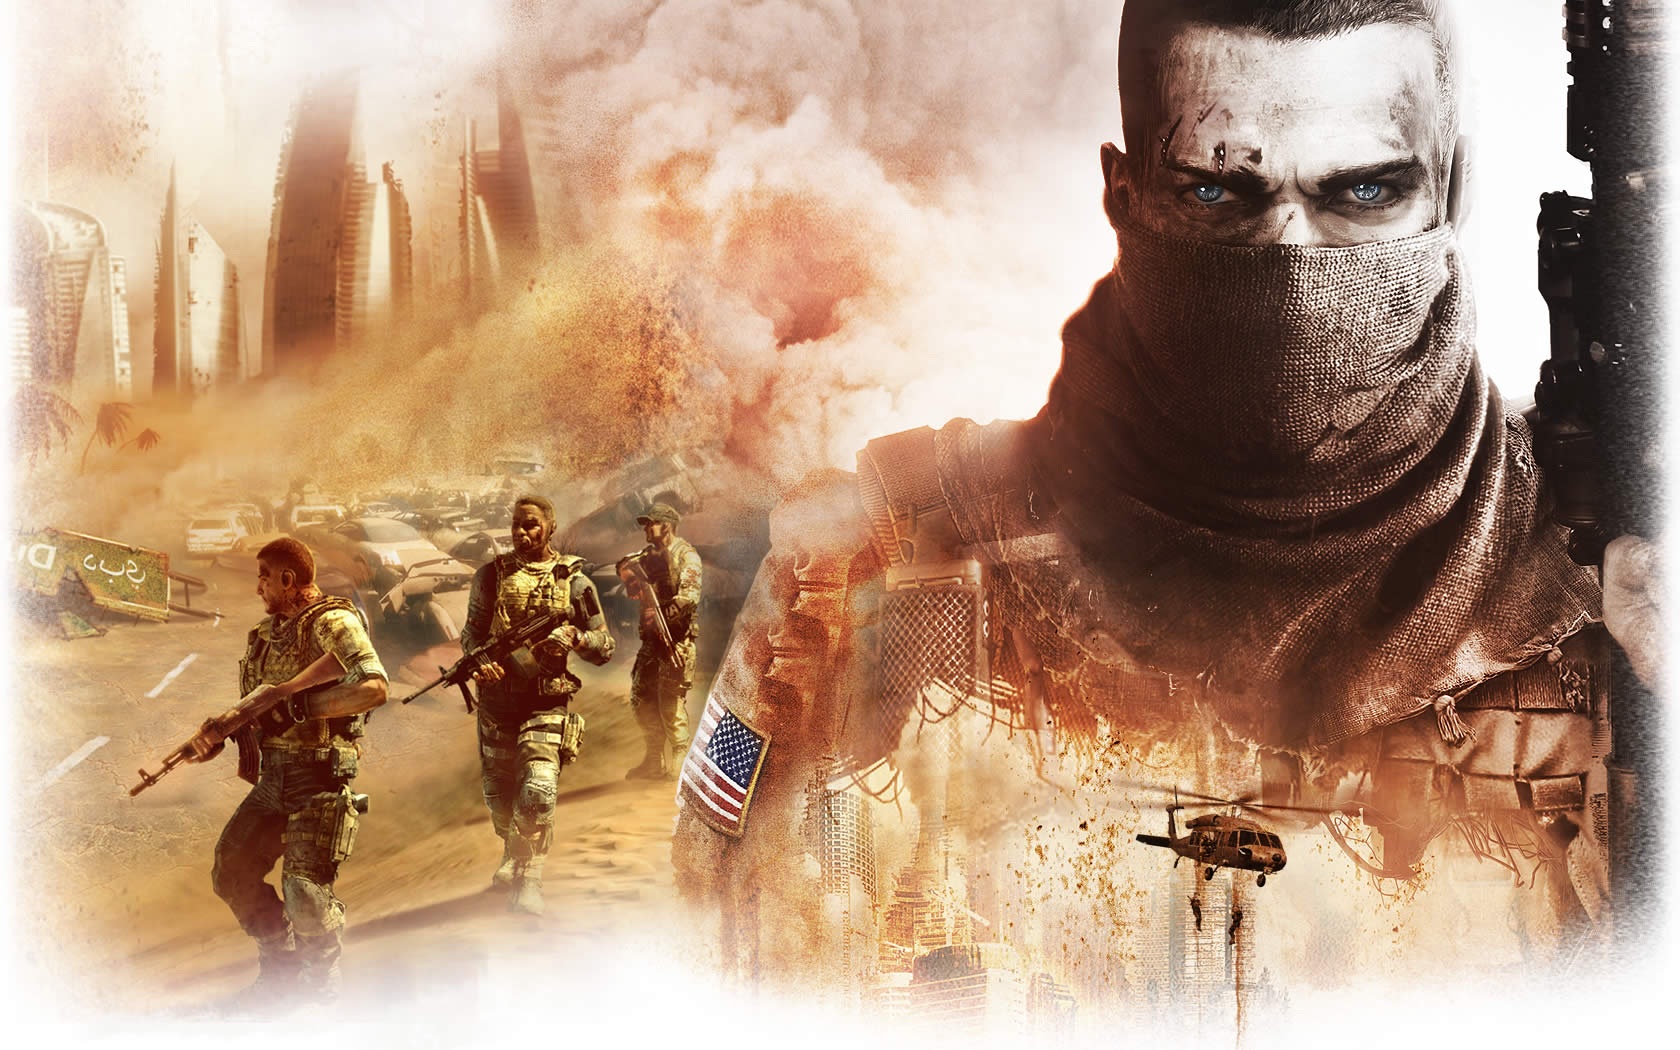 spec ops wallpaper,action adventure game,movie,strategy video game,action film,shooter game